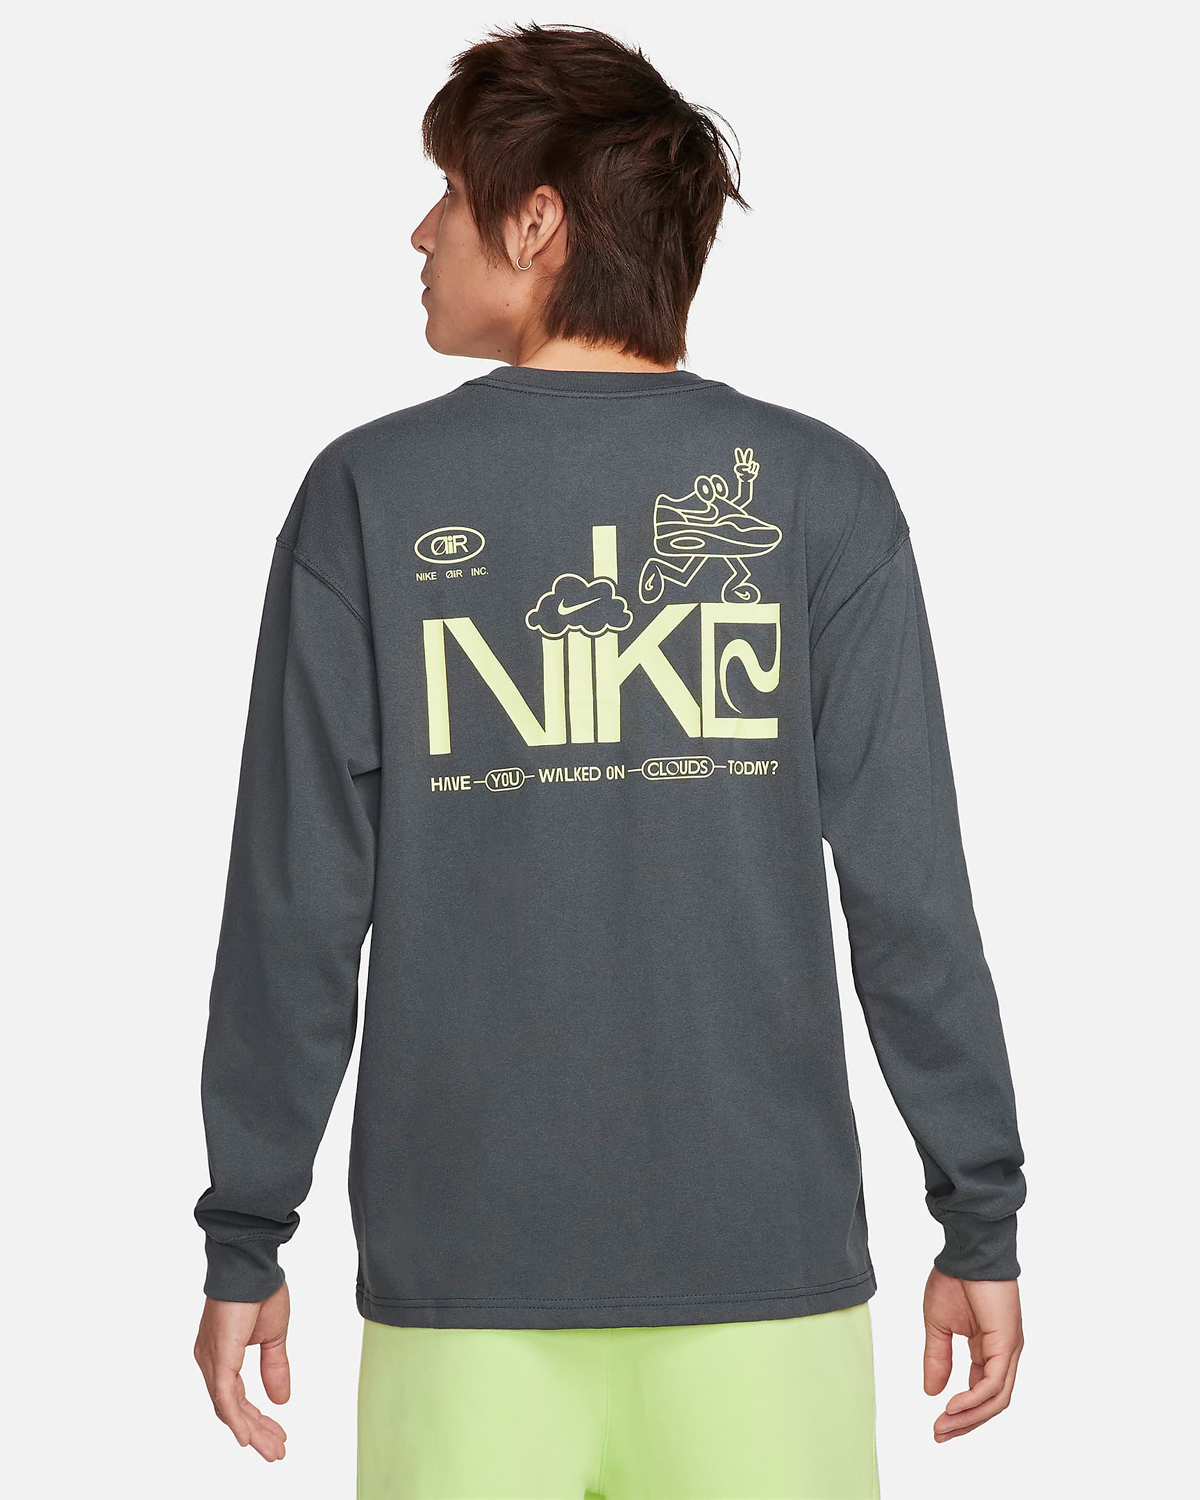 Nike-Sportswear-Max90-Long-Sleeve-T-Shirt-Anthracite-Volt-2